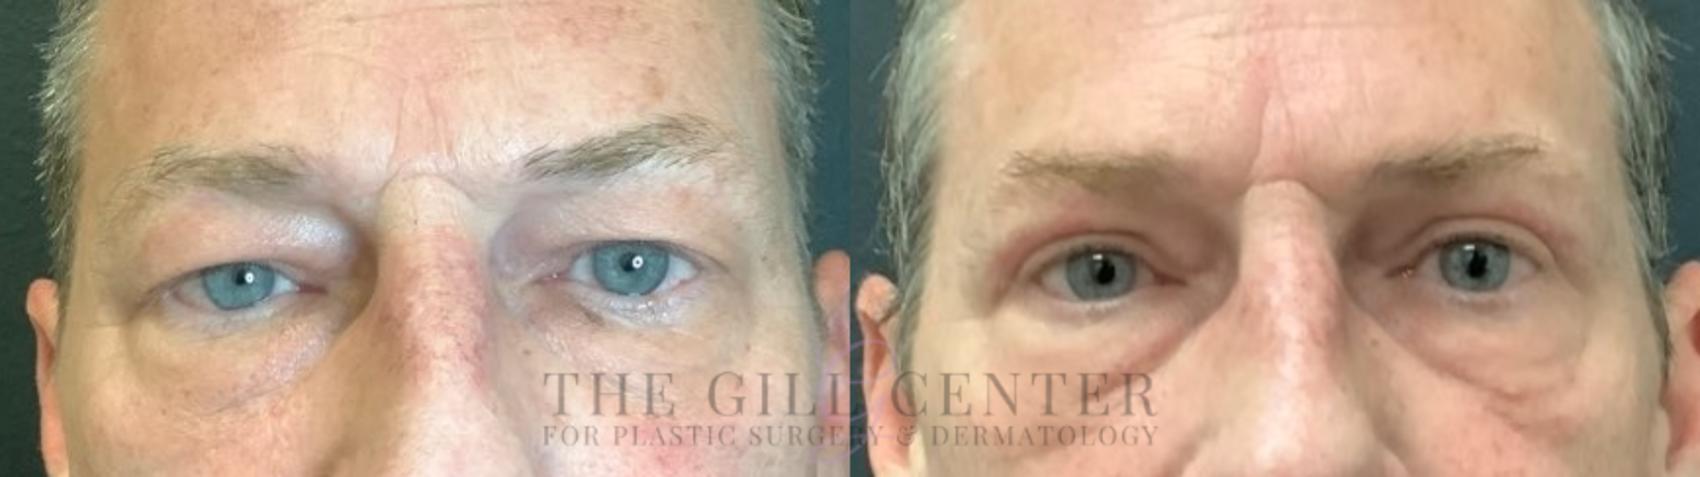 Eyelid Lift Case 518 Before & After Front | The Woodlands, TX | The Gill Center for Plastic Surgery and Dermatology